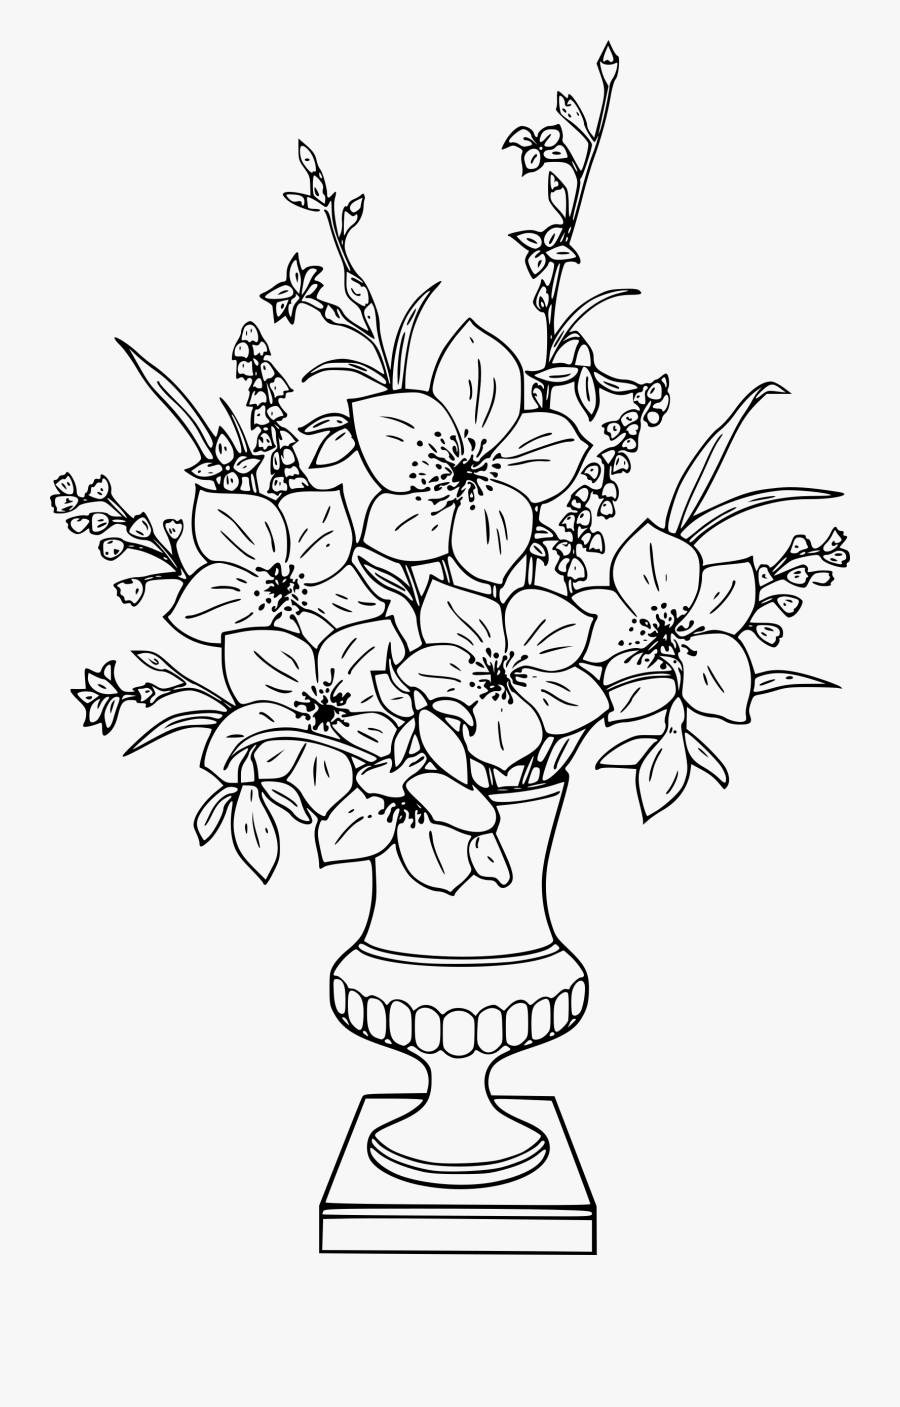 Vase Of Flowers Coloring Page, Transparent Clipart